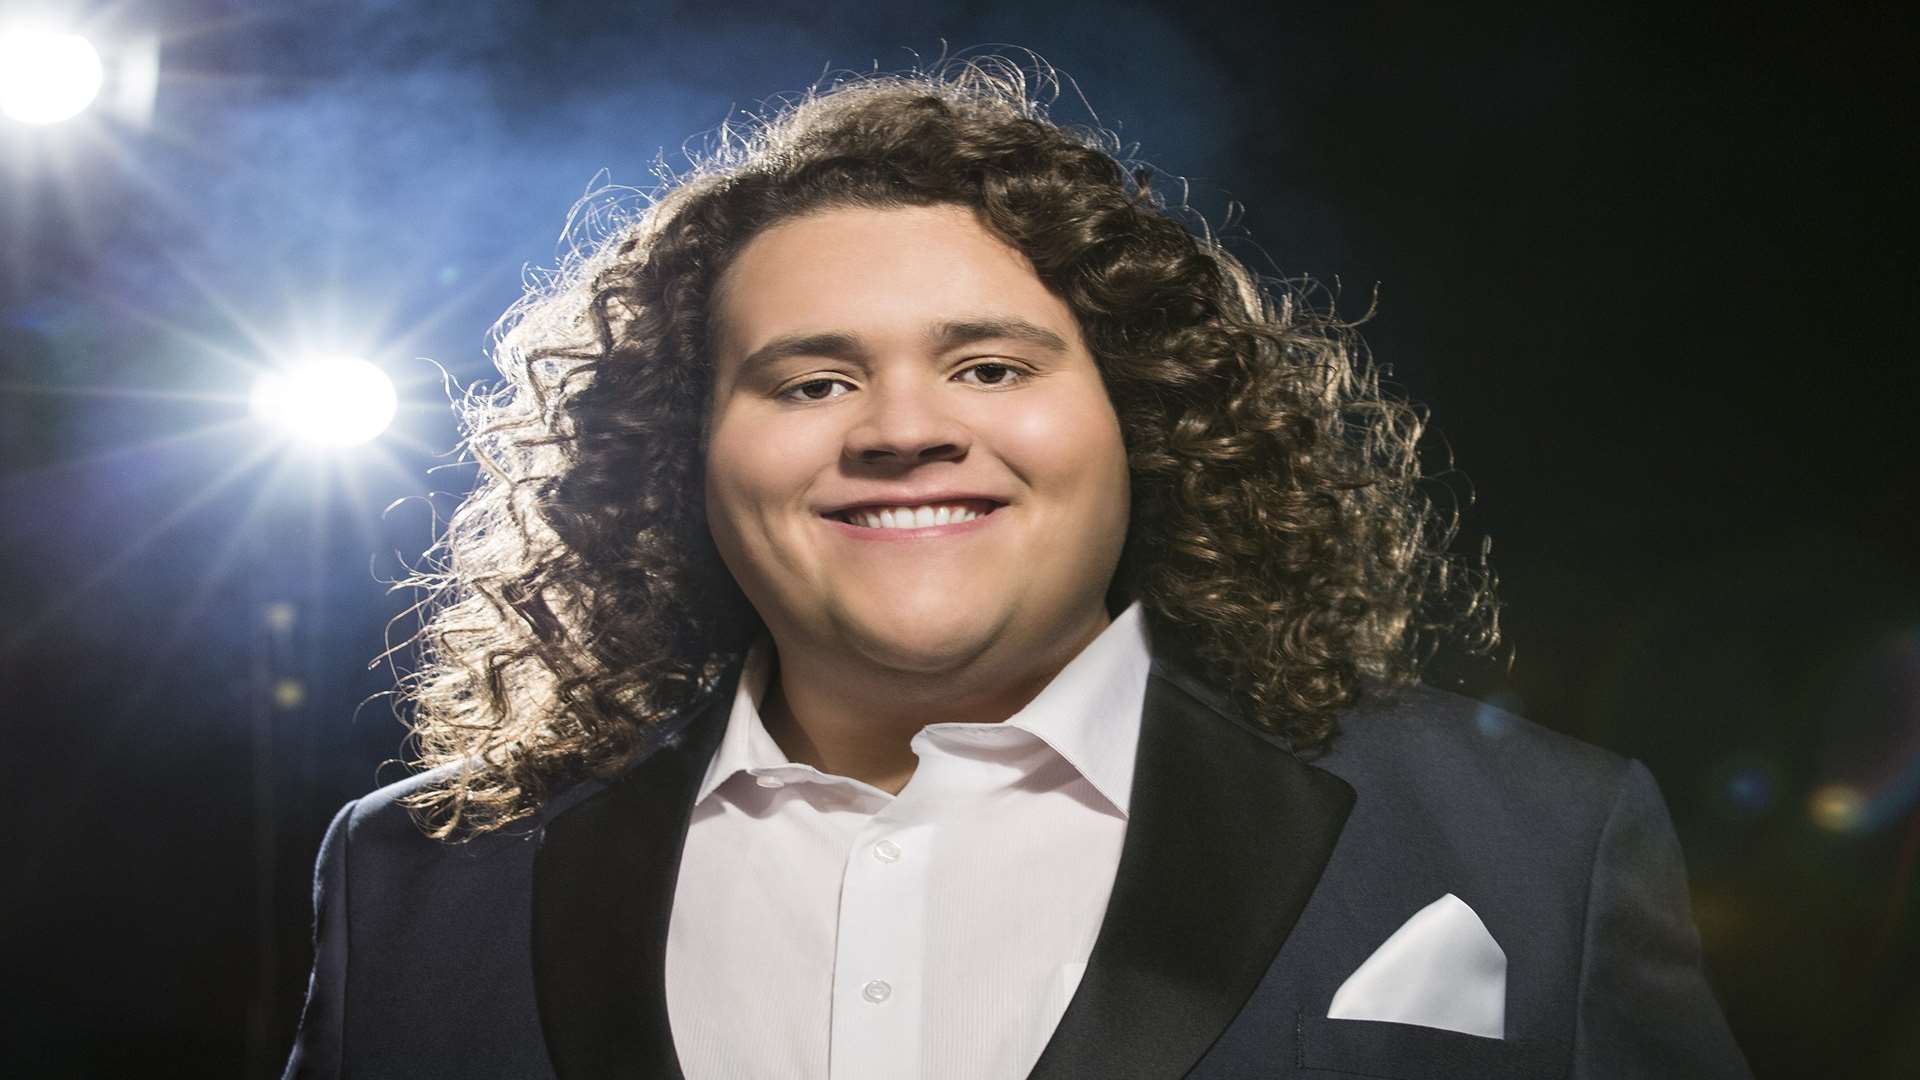 Jonathan Antoine is a tenor, made famous by Britain's Got Talent in 2012